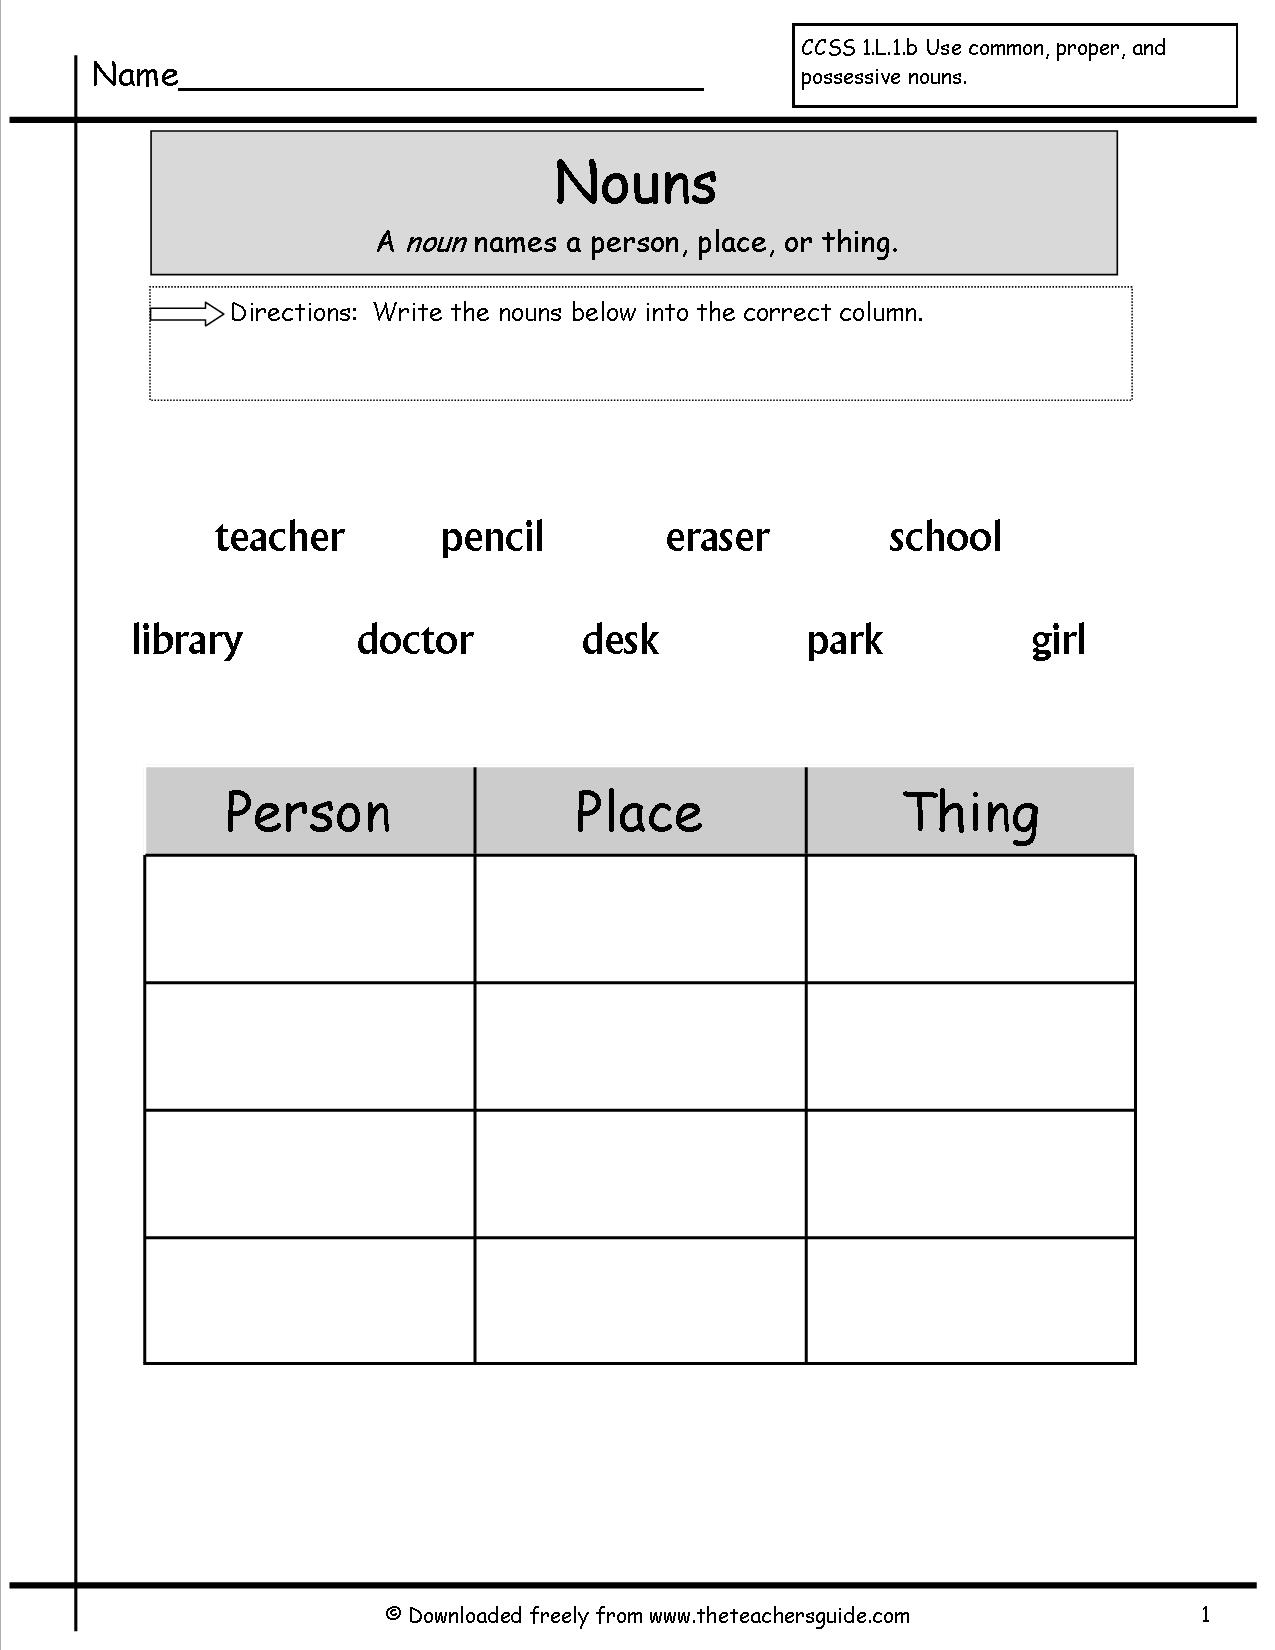 English Grammar Worksheets Grade 1 Image Collections